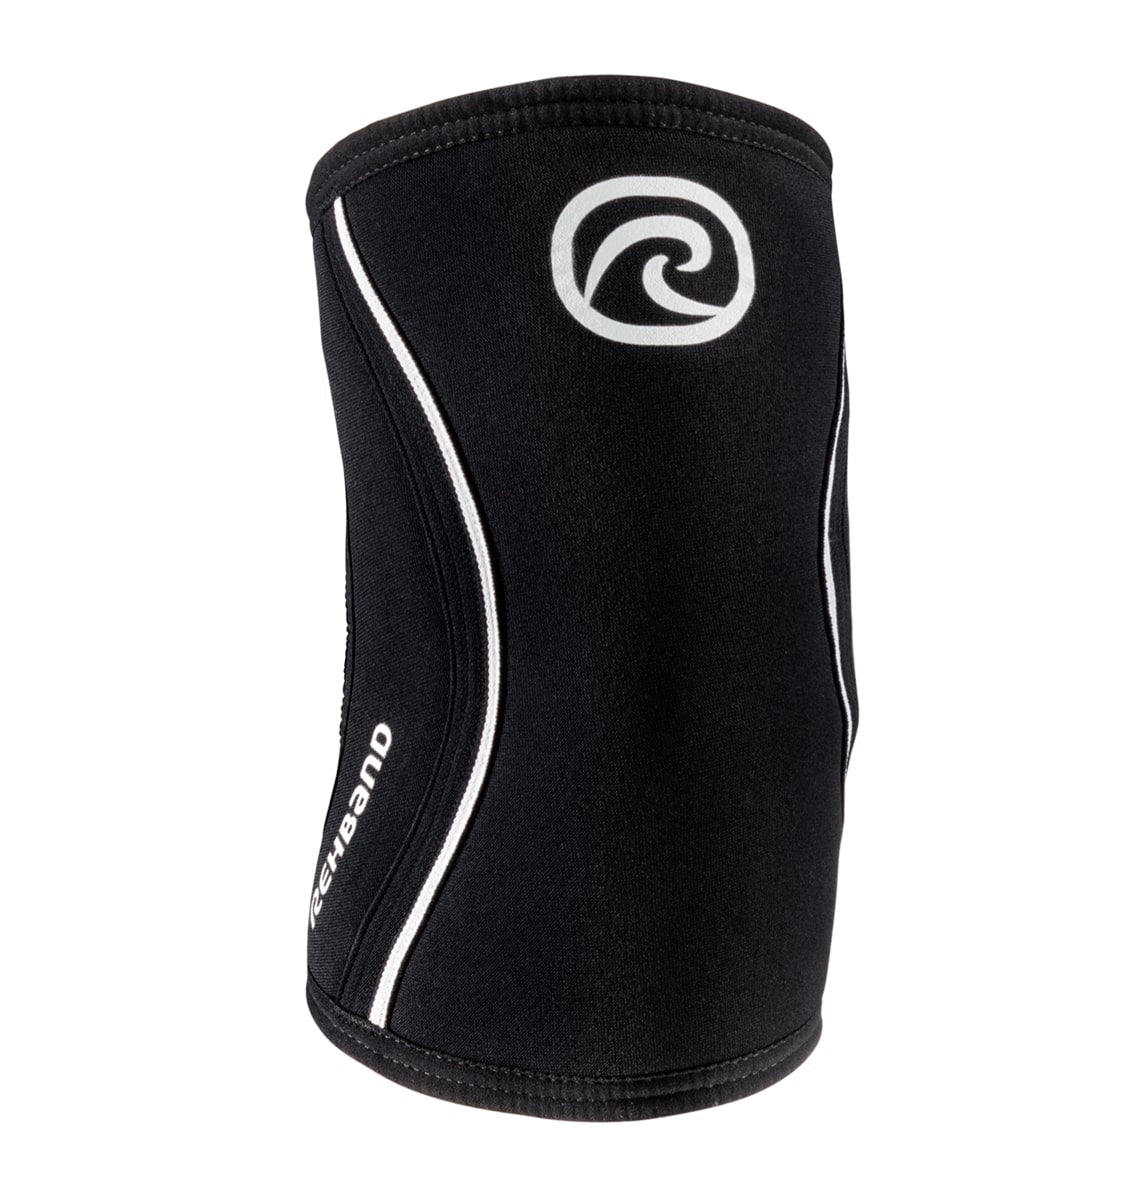 102306-01 - Rehband Rx Elbow Sleeve - Black - 5mm - Front